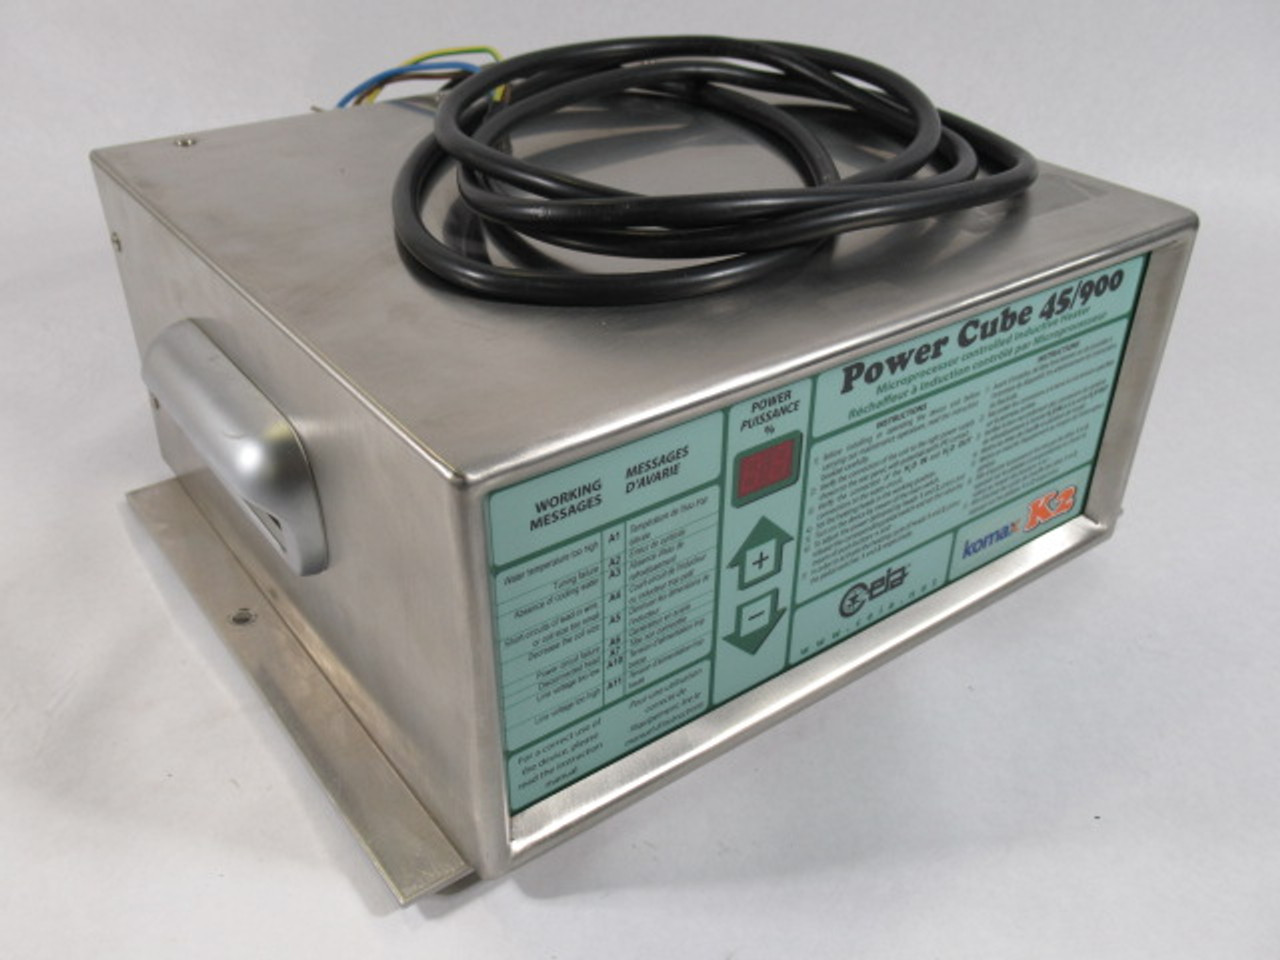 Ceia 45/900 Power Cube Microprocessor Controlled Inductive Heater USED